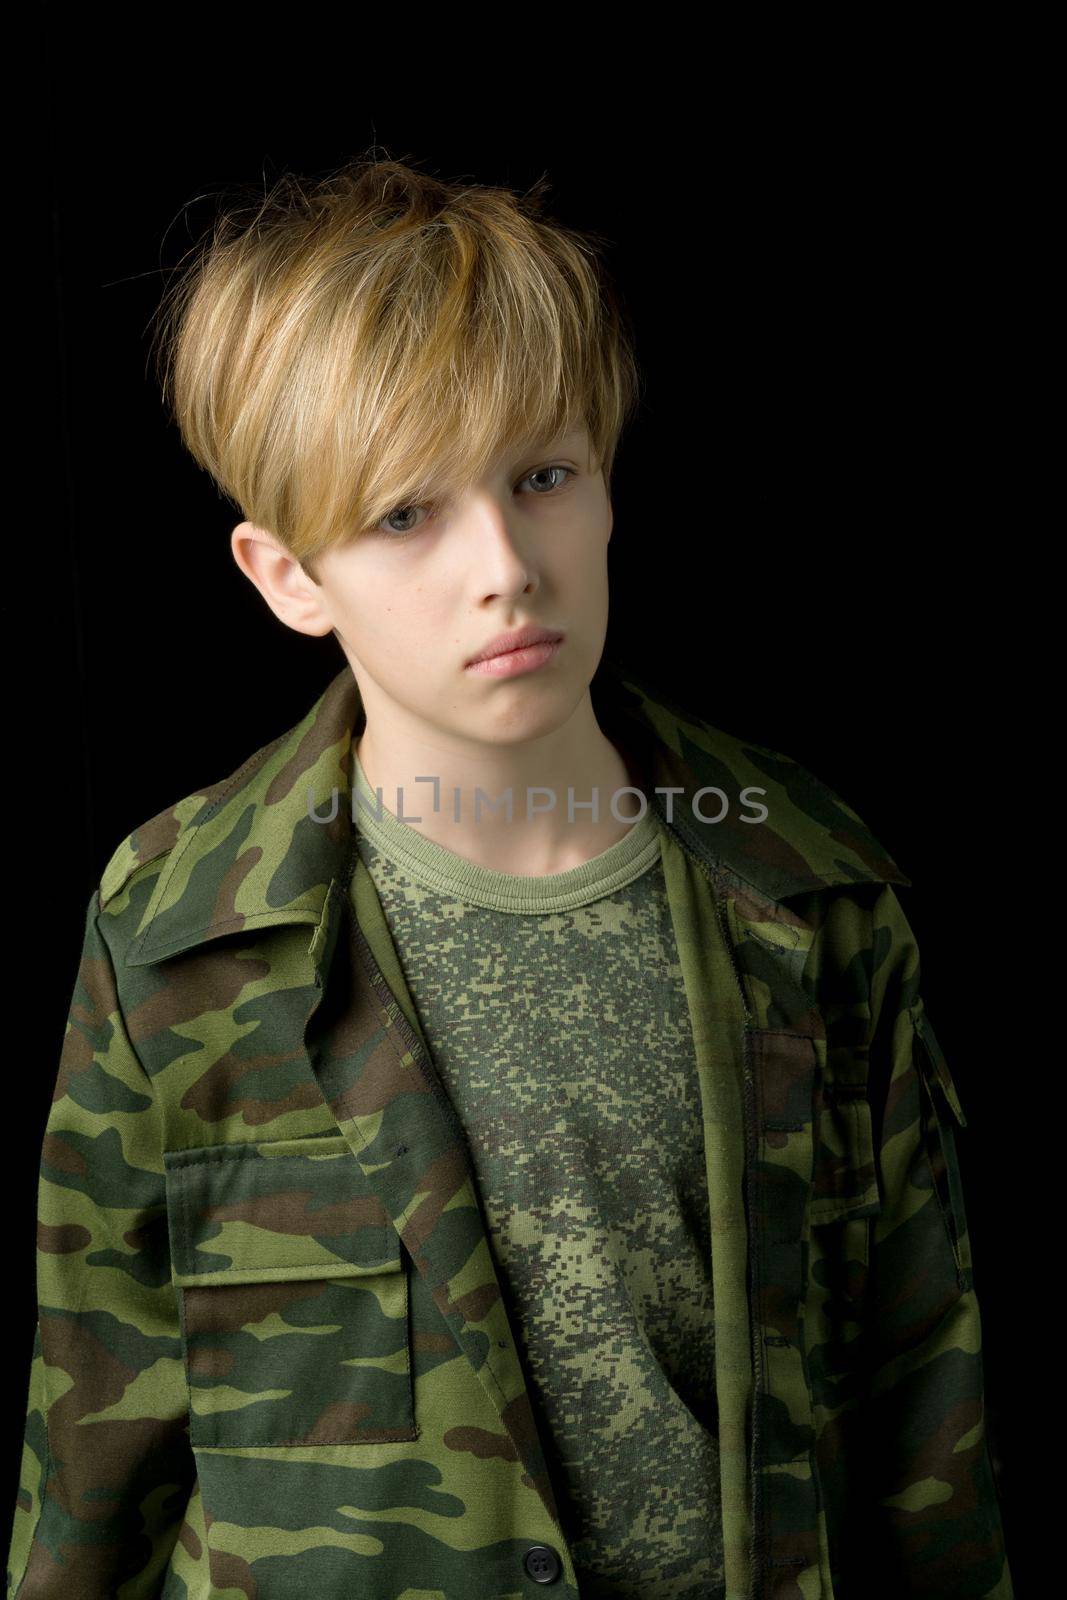 Confident teenage boy in camouflage clothing. Teenager in khaki military clothing posing on black background in studio. Boy wearing camouflage t-shirt and military jacket